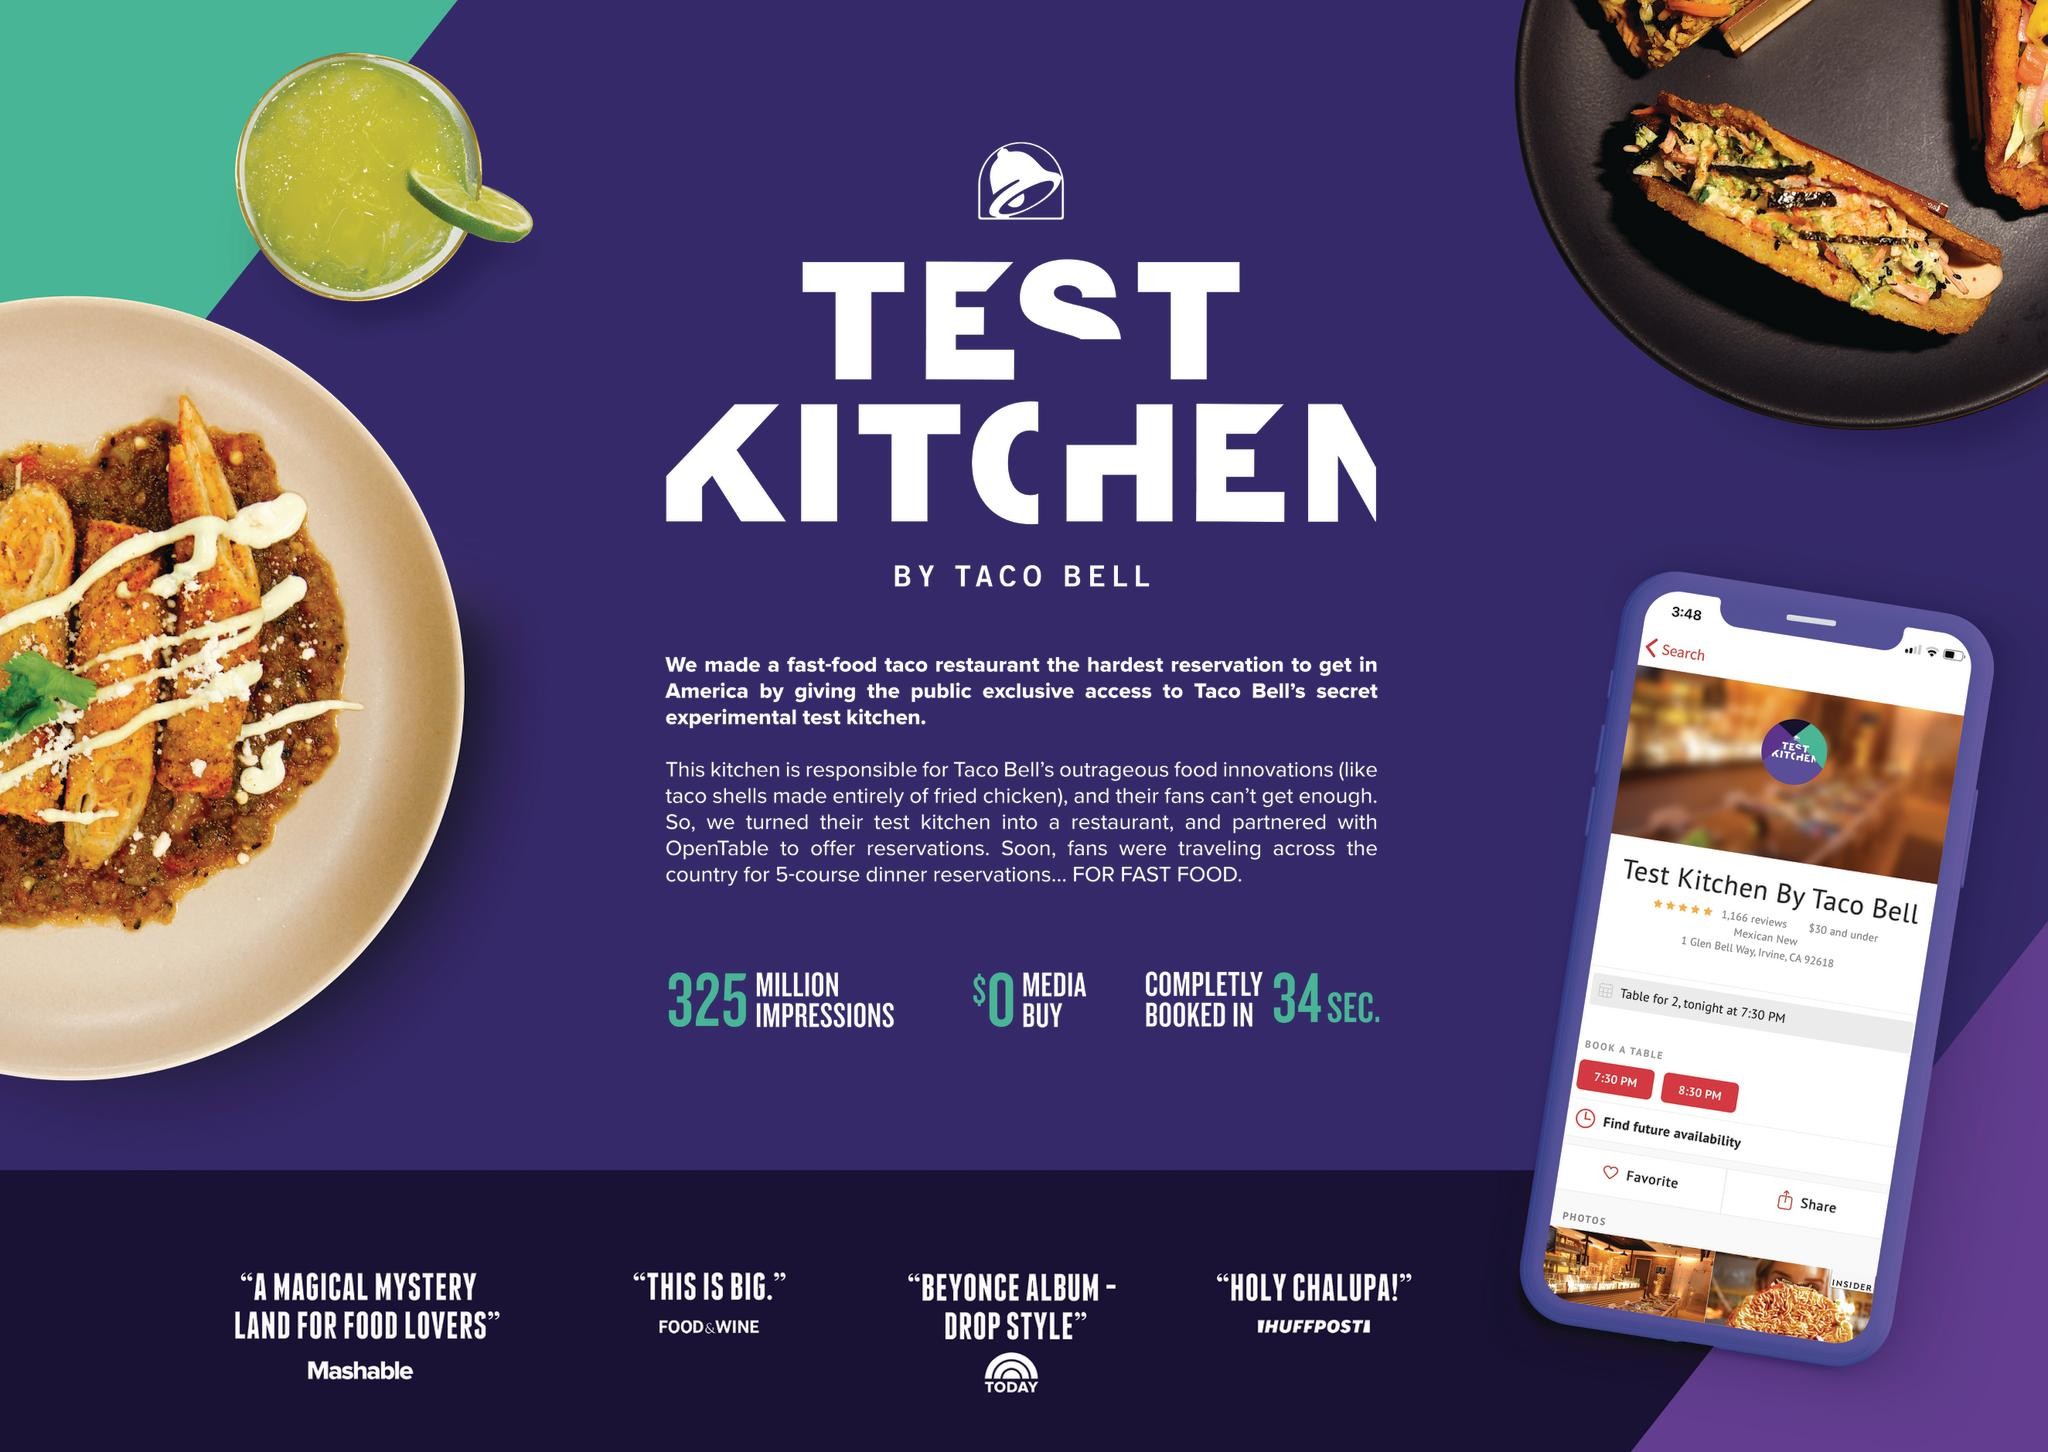 Test Kitchen by Taco Bell